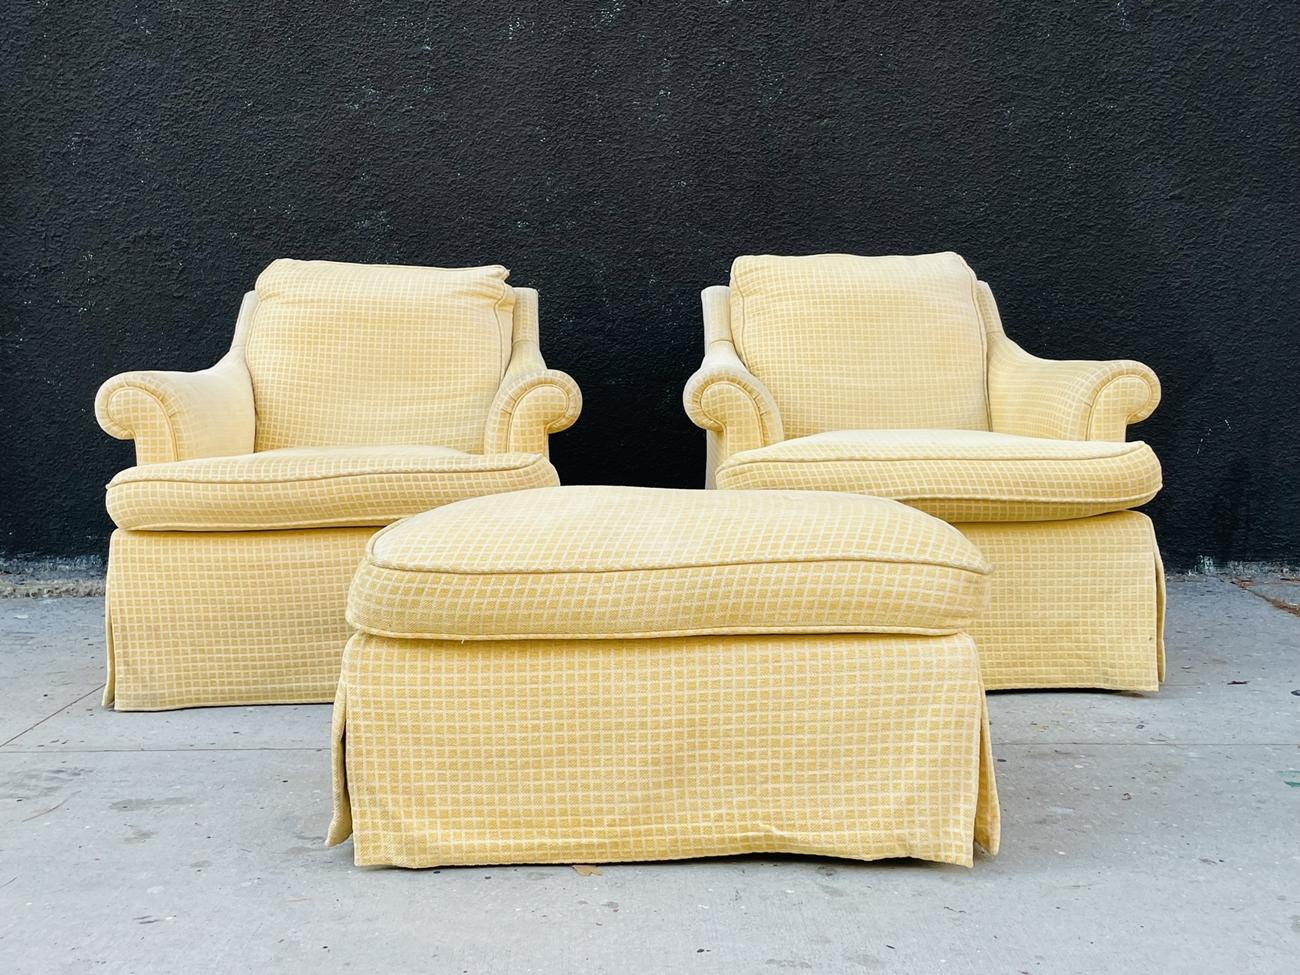 A beautiful pair of lounge chairs and ottoman designed and manufactured in Los Angeles, California by A. Rudin.
The chairs are fully aupholstered in a yellow fabric with a beautiful pattern, the chairs and ottoman have casters and are easy to move